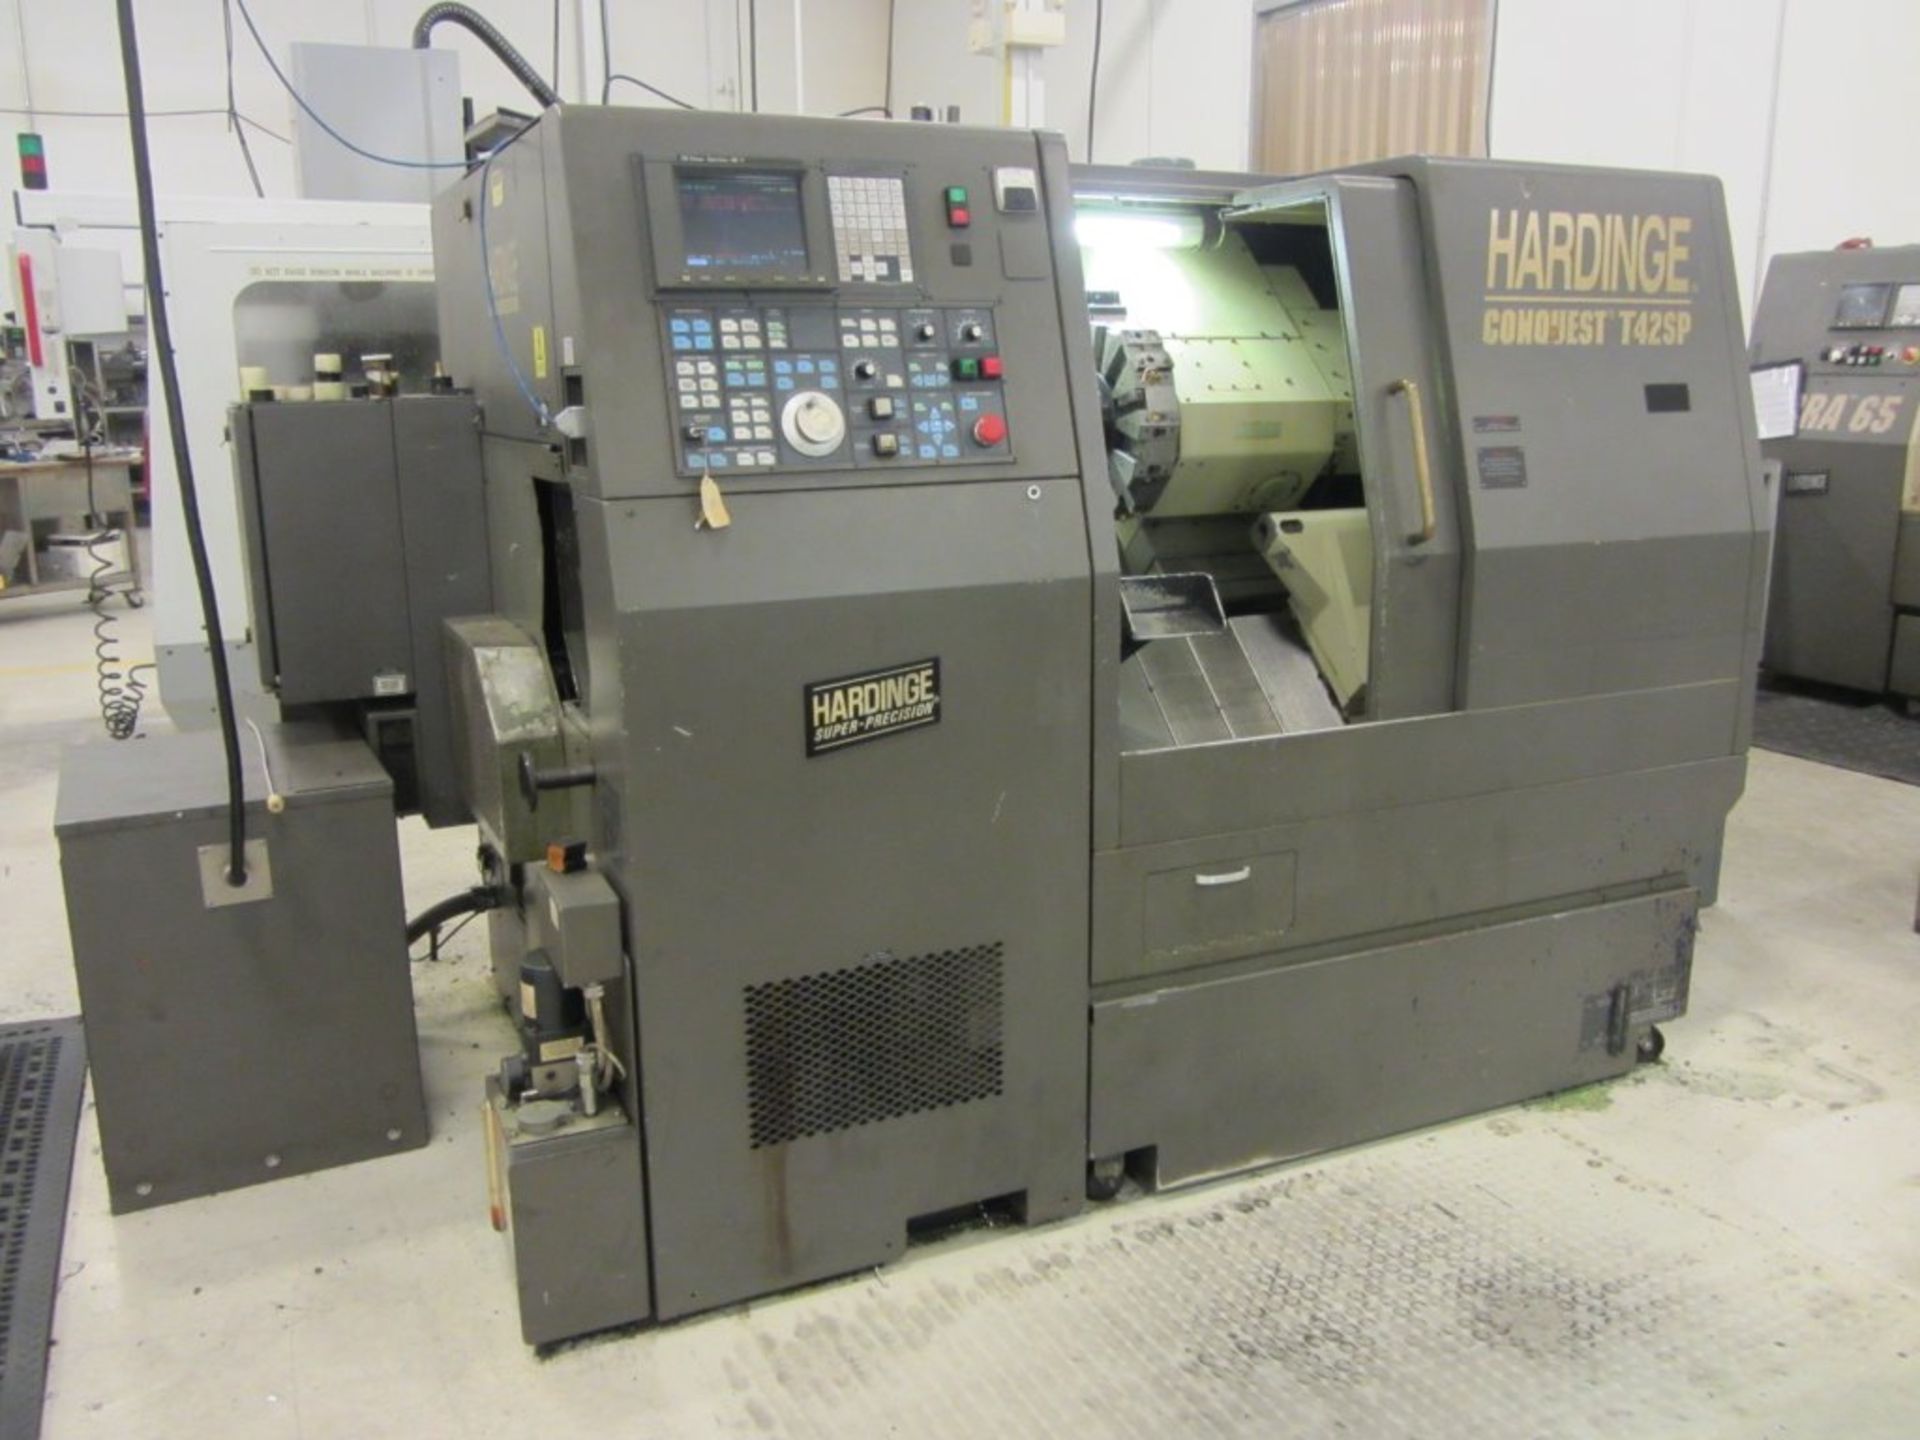 Hardinge Conquest T42SP CNC Turning Center with Sub-Spindle & Milling, Collet Chuck, Main Spindle